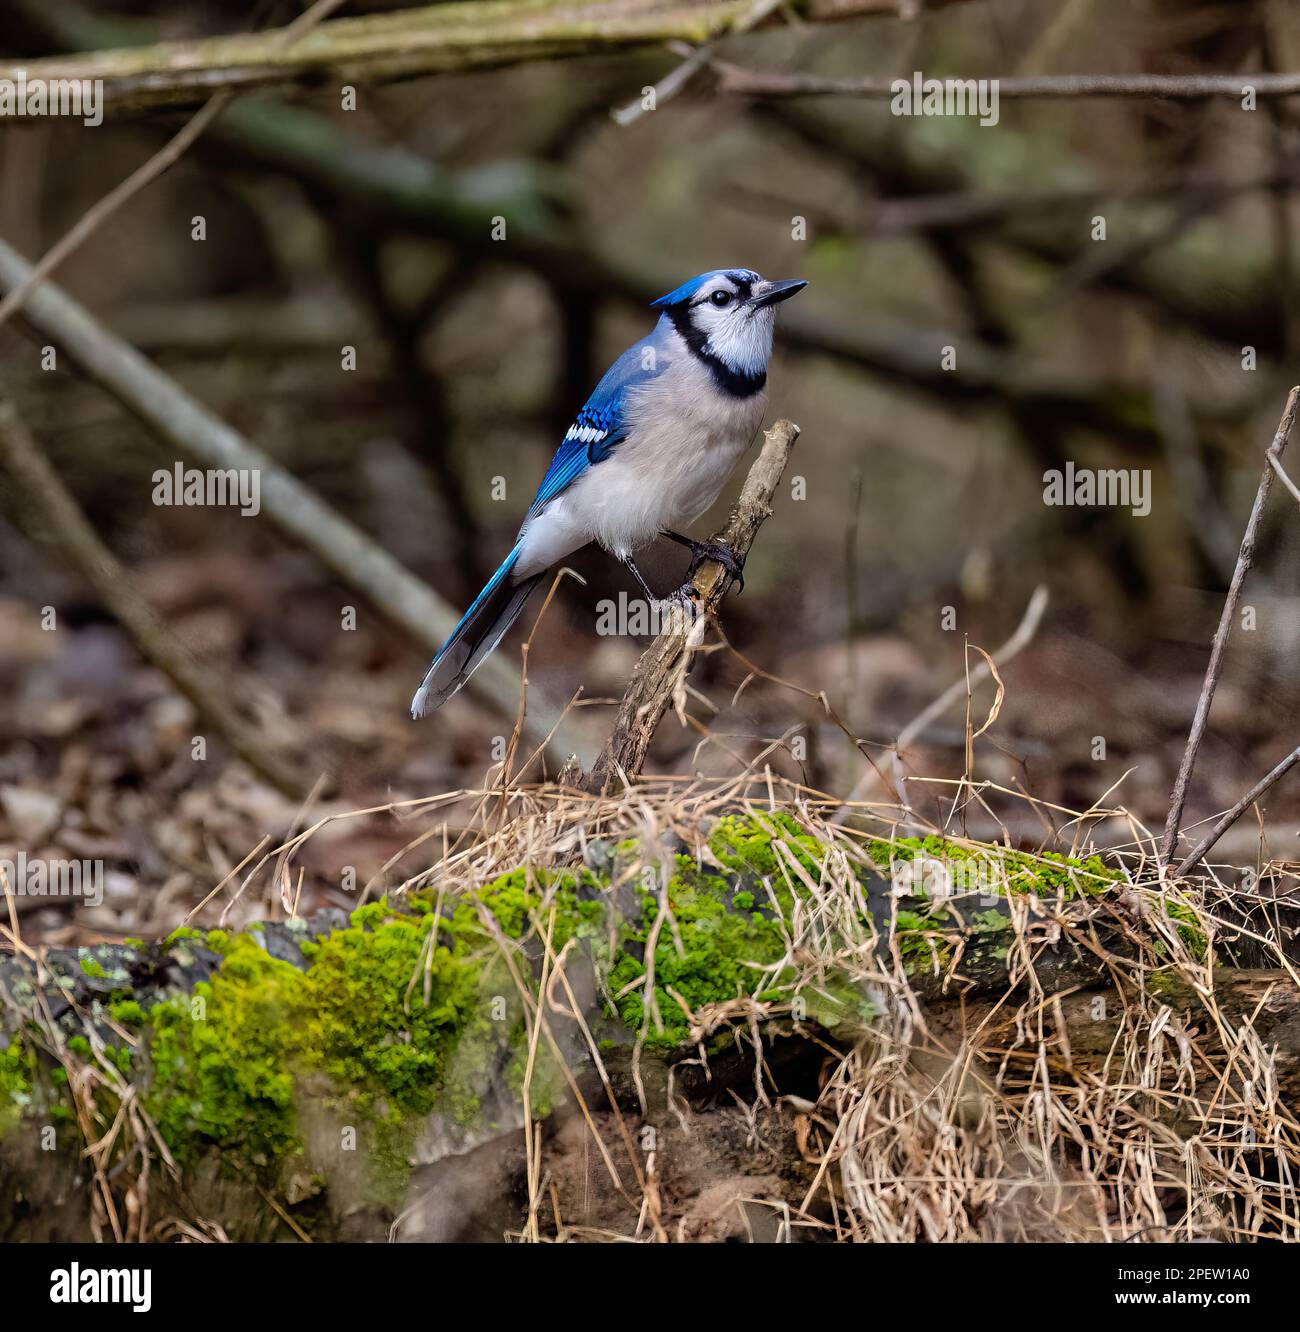 A closeup of a cute blue jay perched on a tree branch in a forest Stock Photo